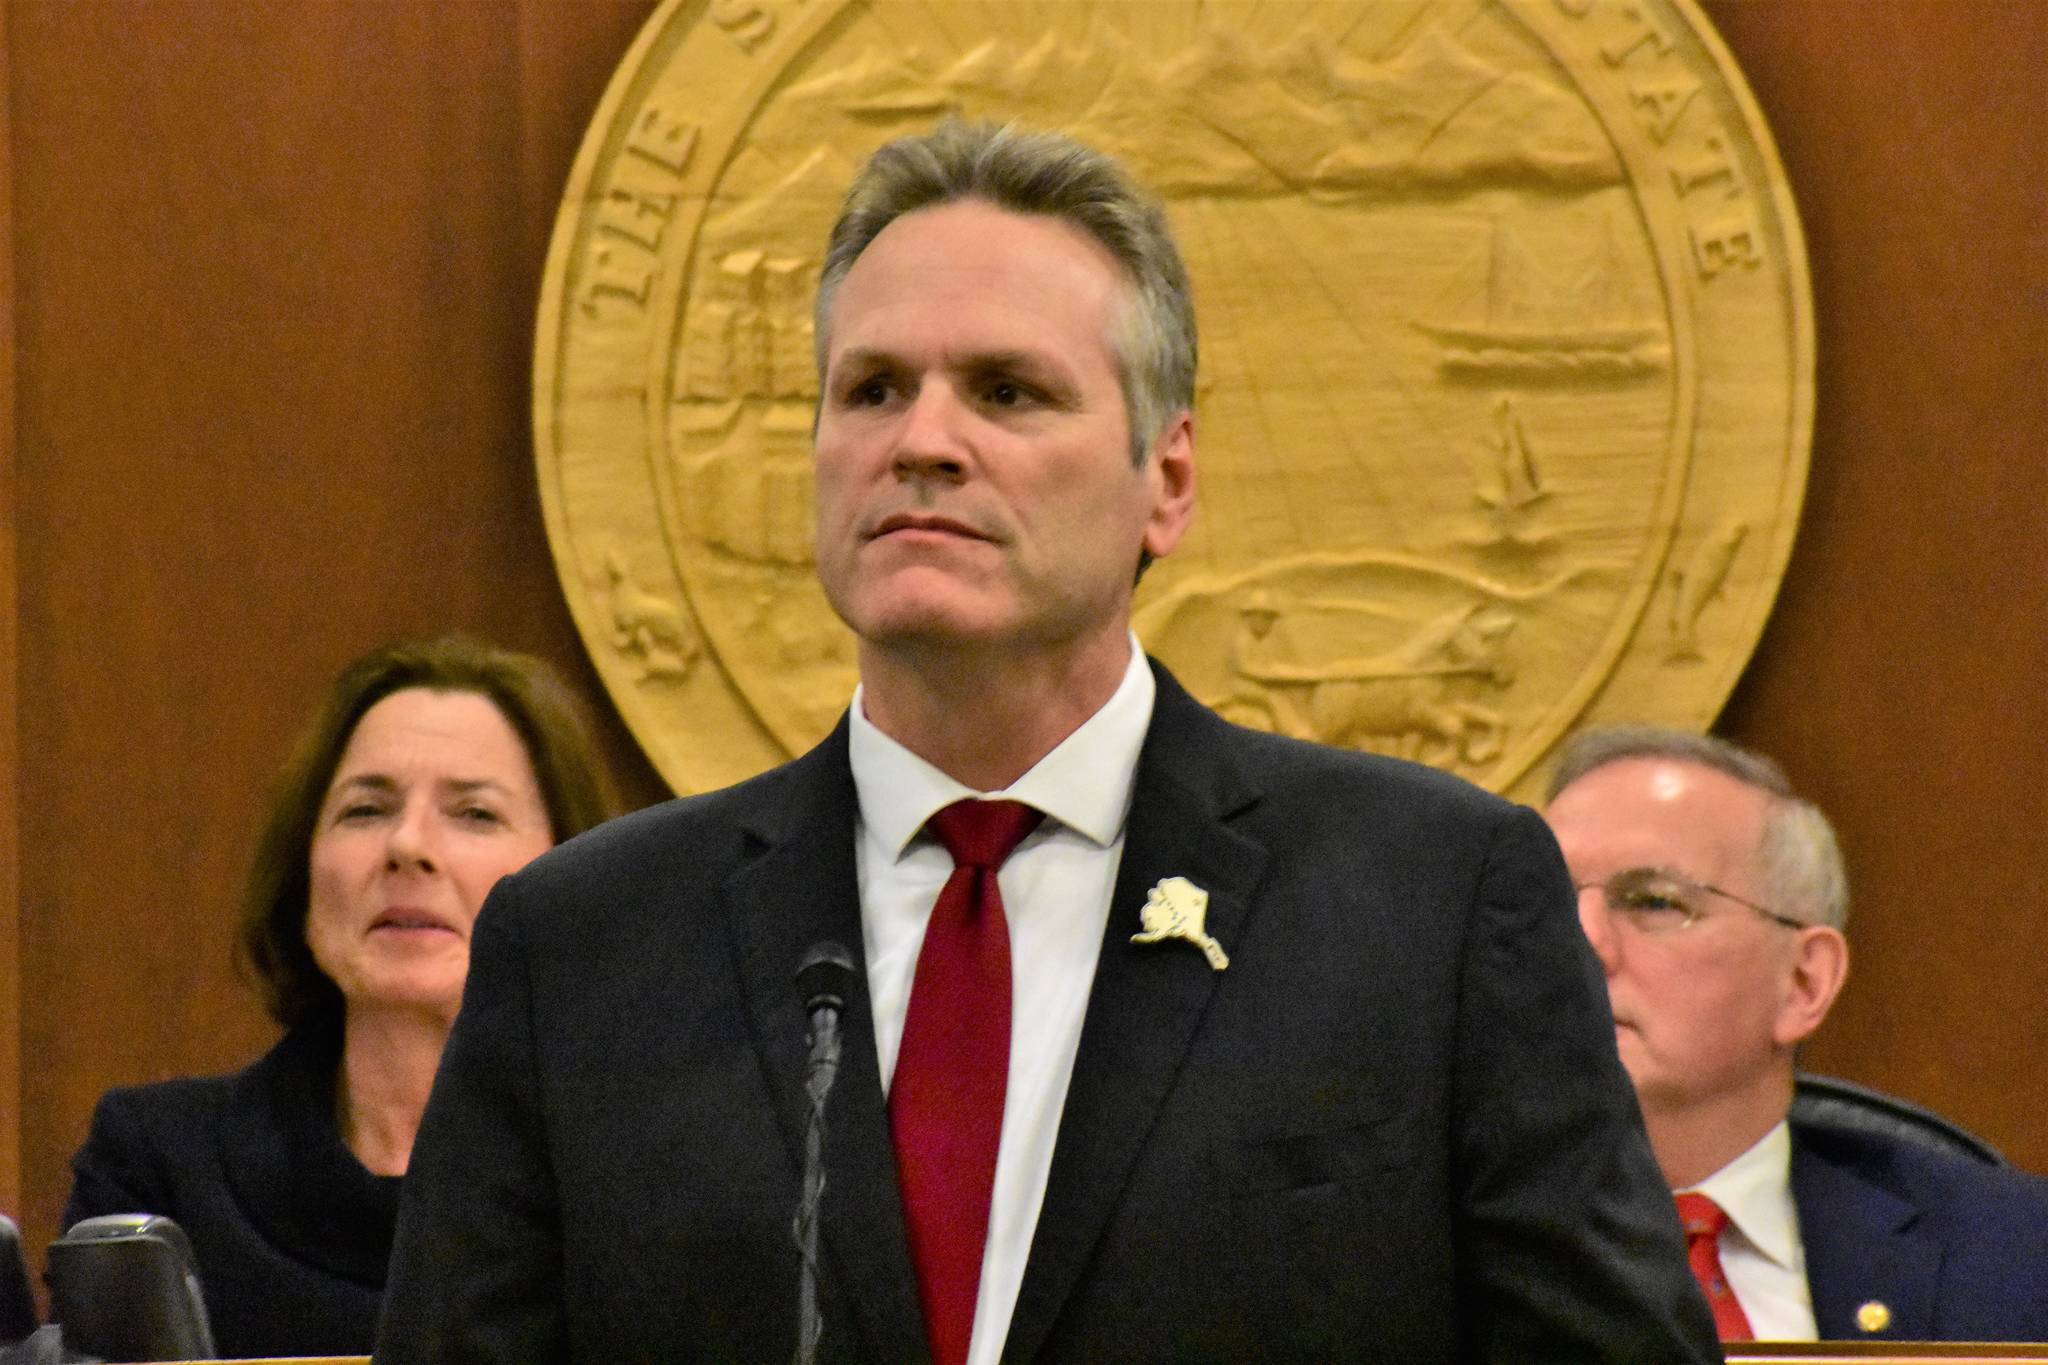 Gov. Mike Dunleavy gives his State of the State address before a joint session of the Alaska Legislature on Monday, Jan. 27, 2020. (Peter Segall / Juneau Empire File)